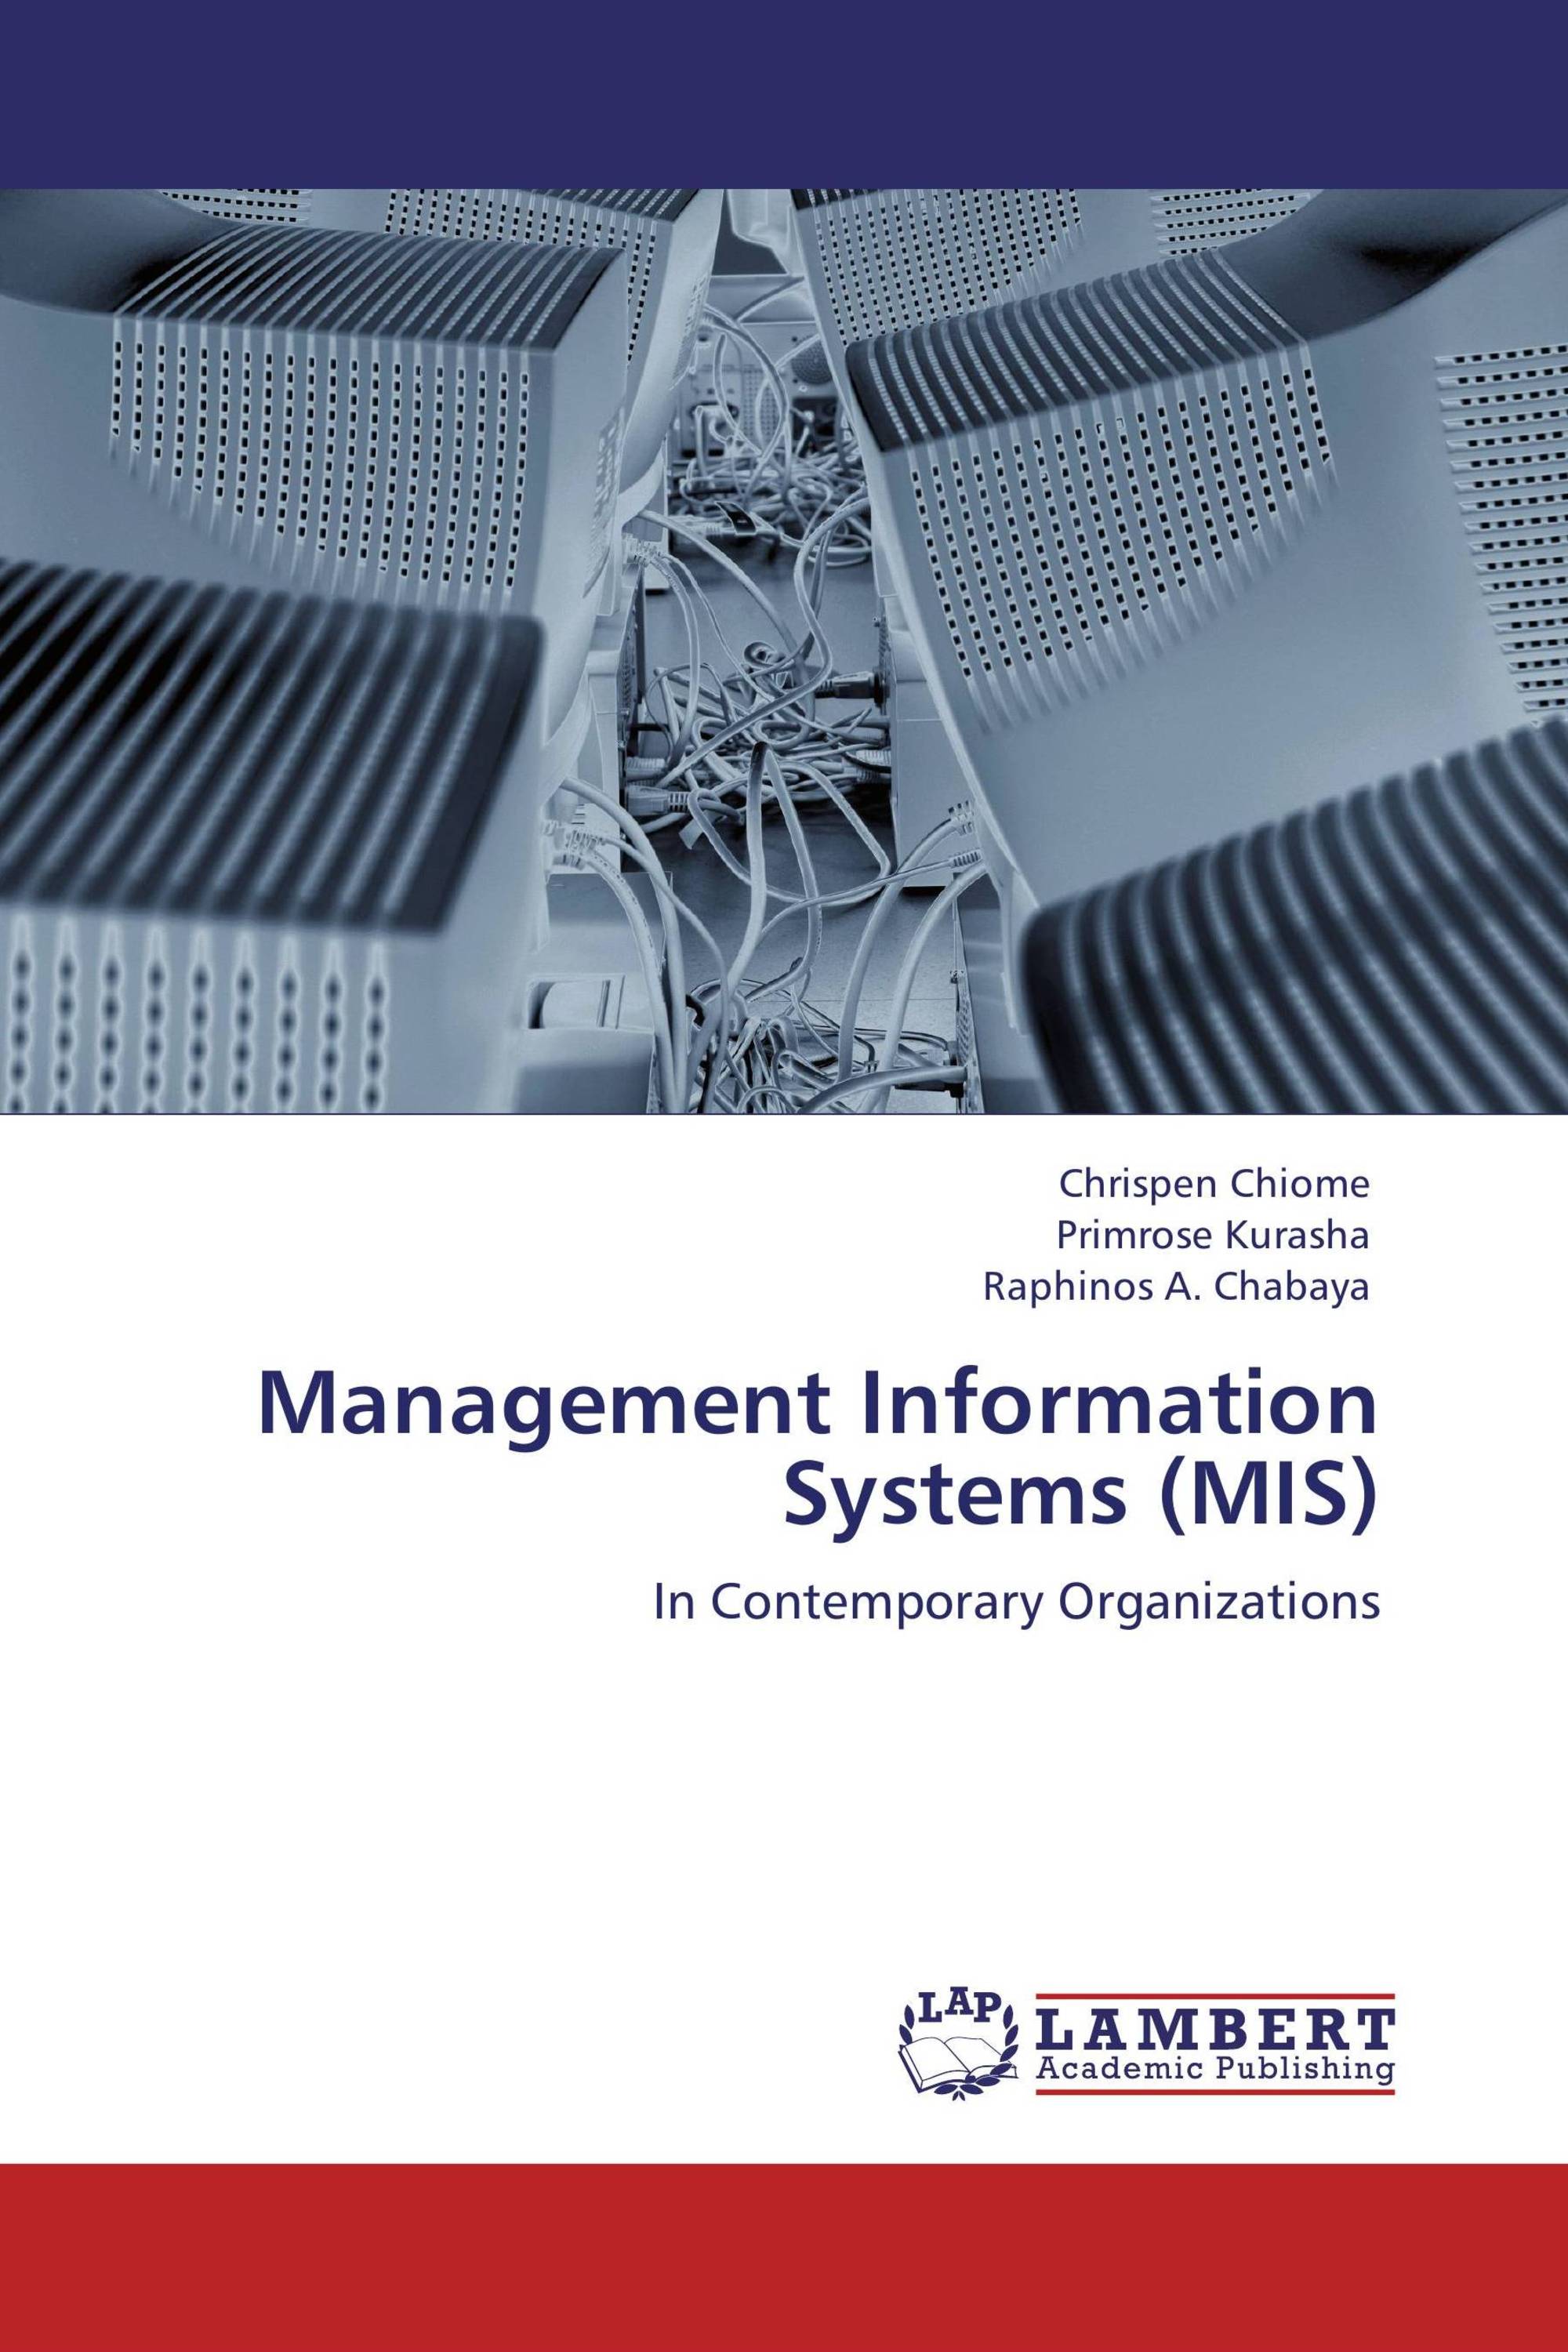 management information systems dissertation topic